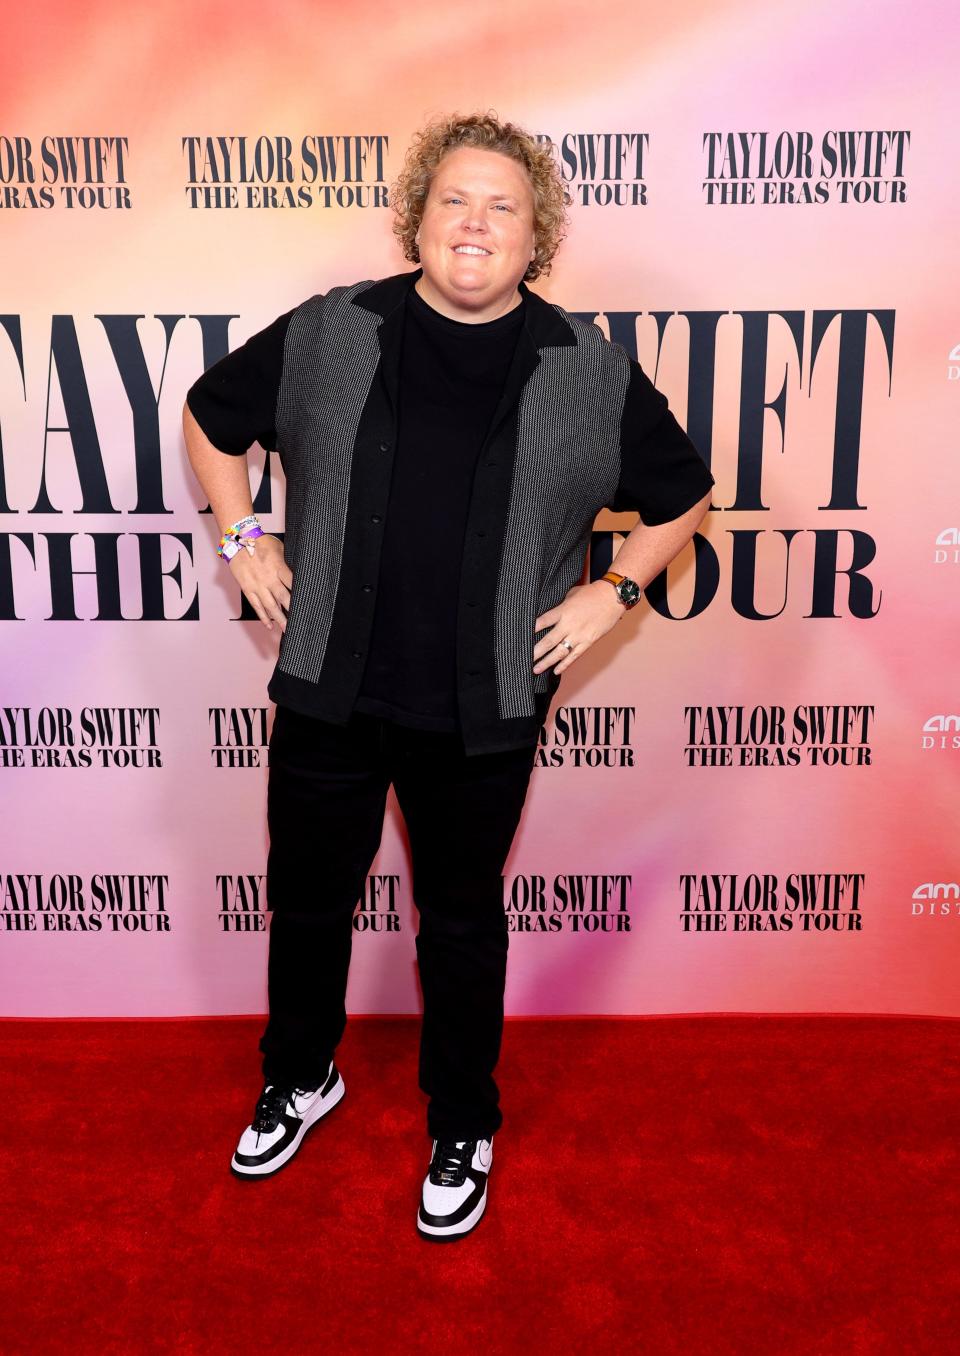 Fortune Feimster attends "Taylor Swift: The Eras Tour" Concert Movie World Premiere on October 11, 2023 in Los Angeles, California.